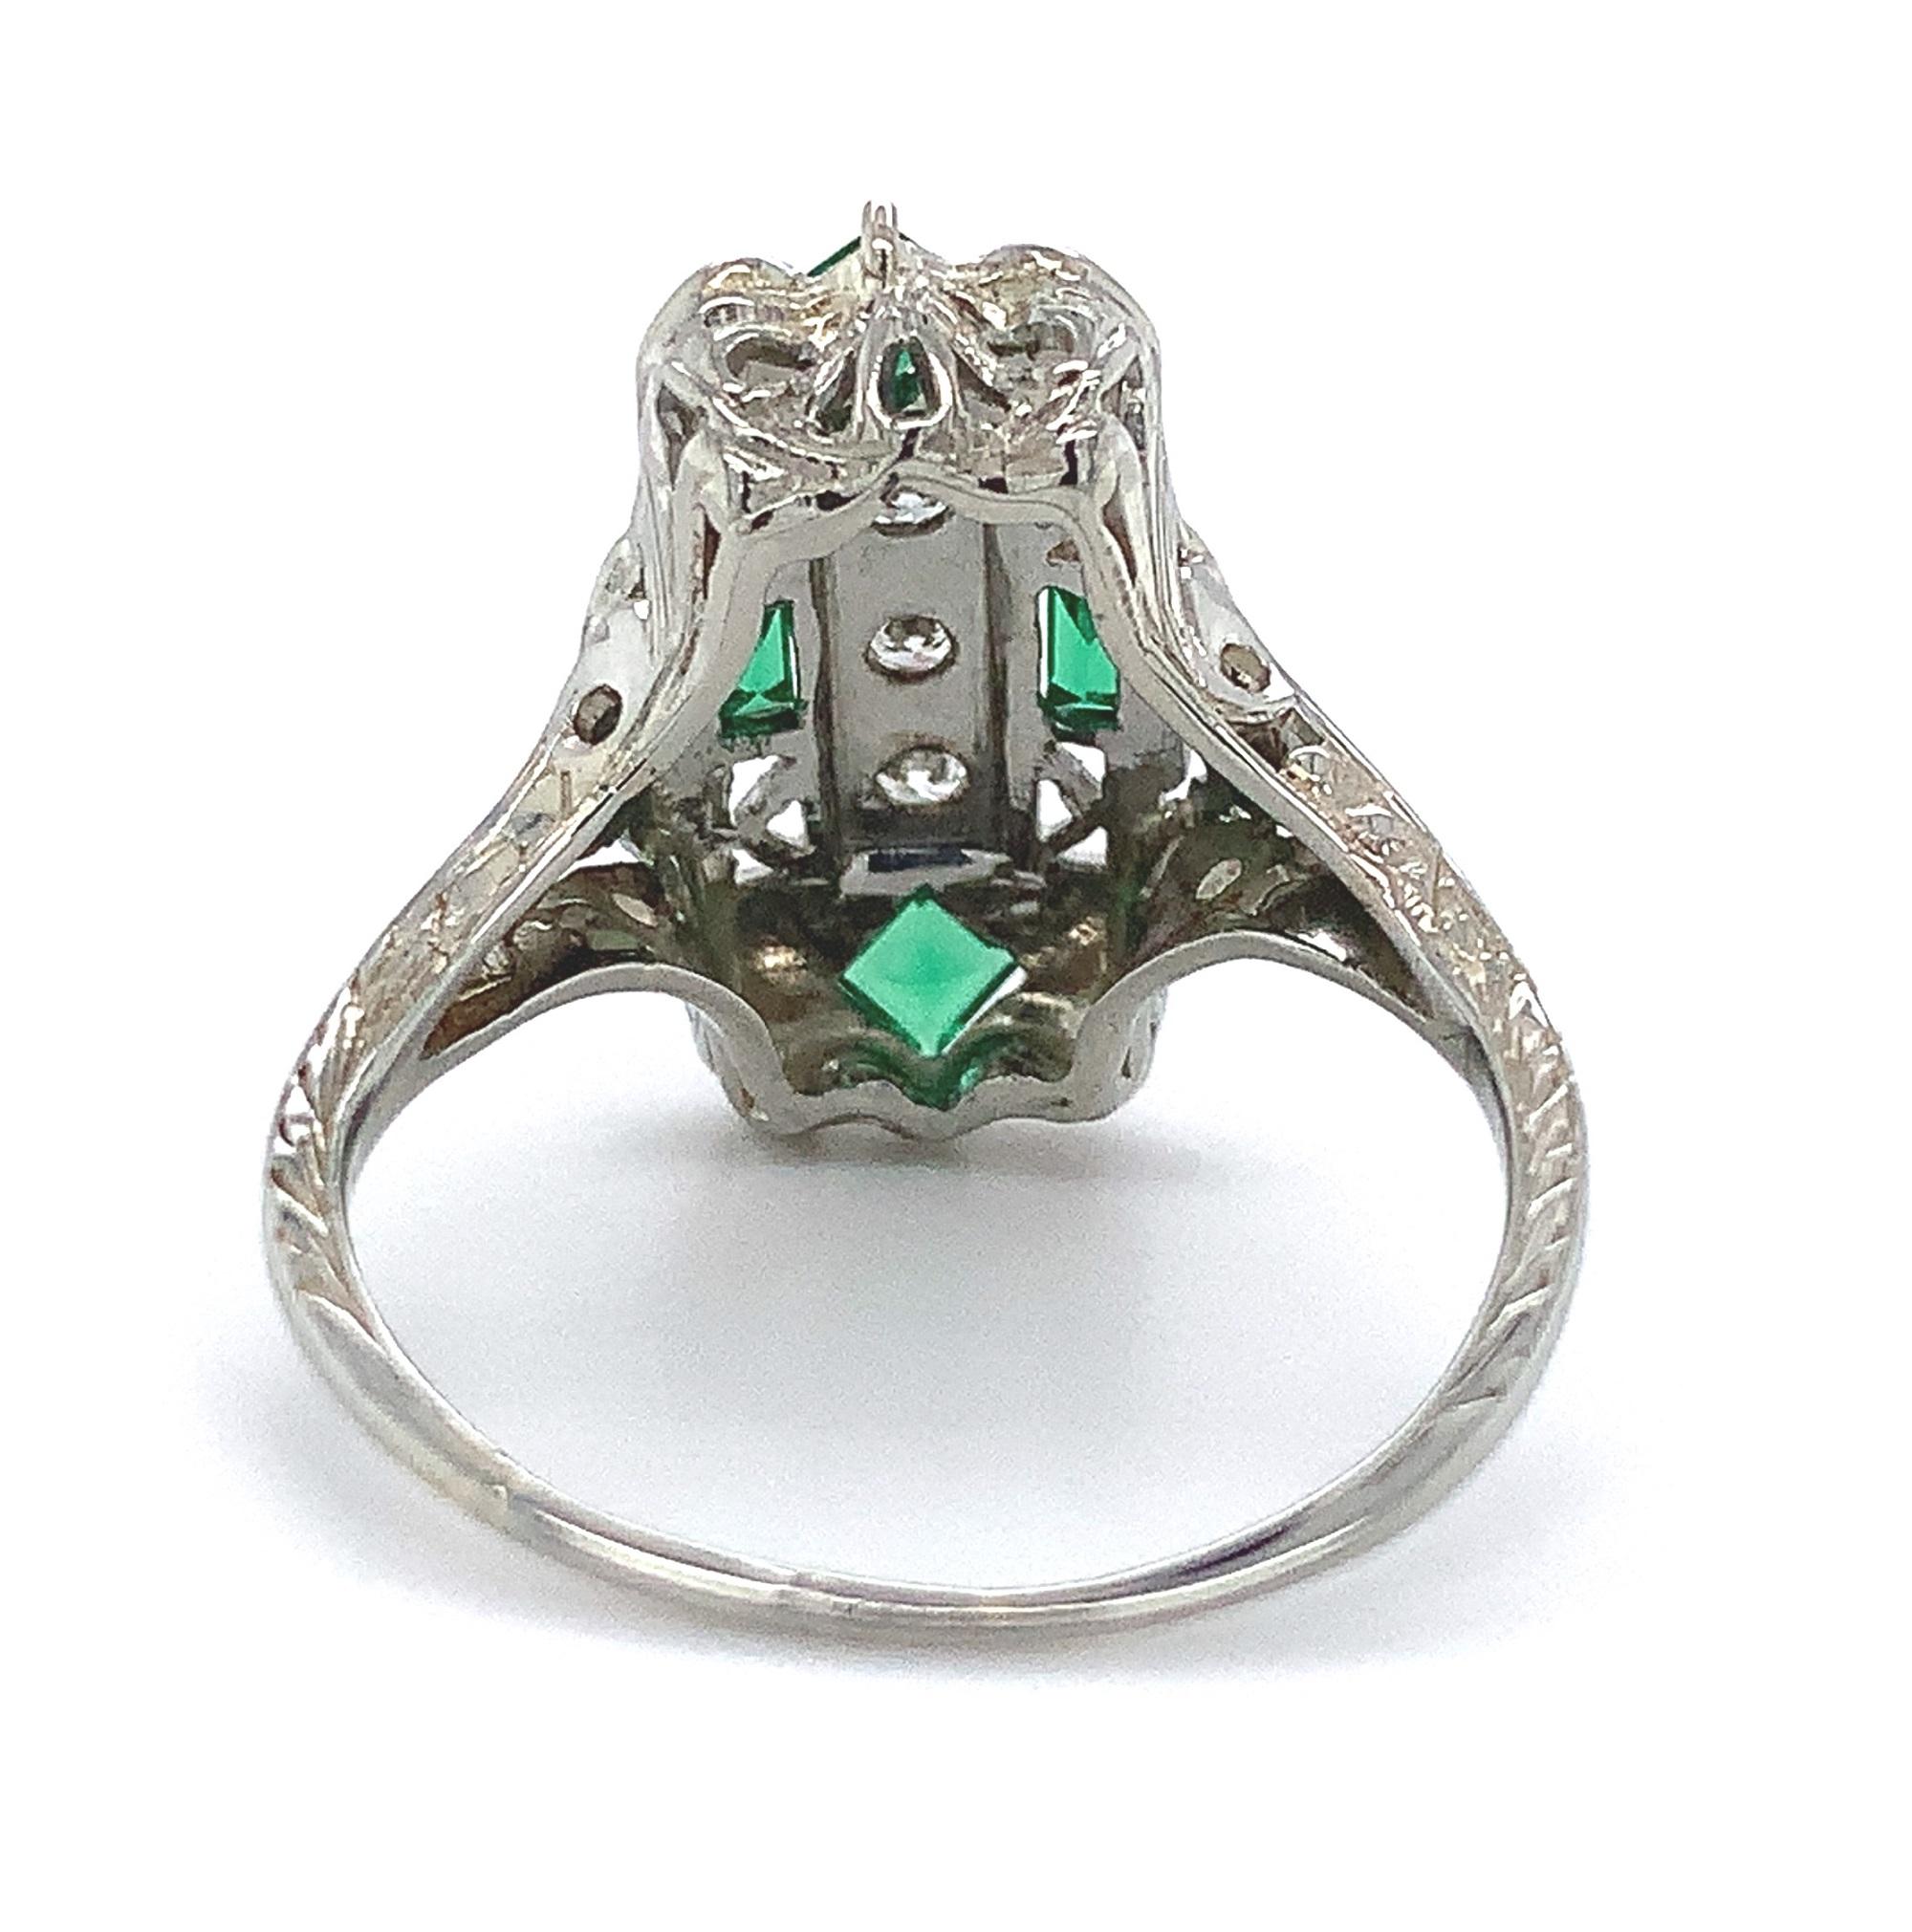 18K 3 Stone Diamond Filigree Ring with Syn Emerald In Excellent Condition For Sale In Big Bend, WI